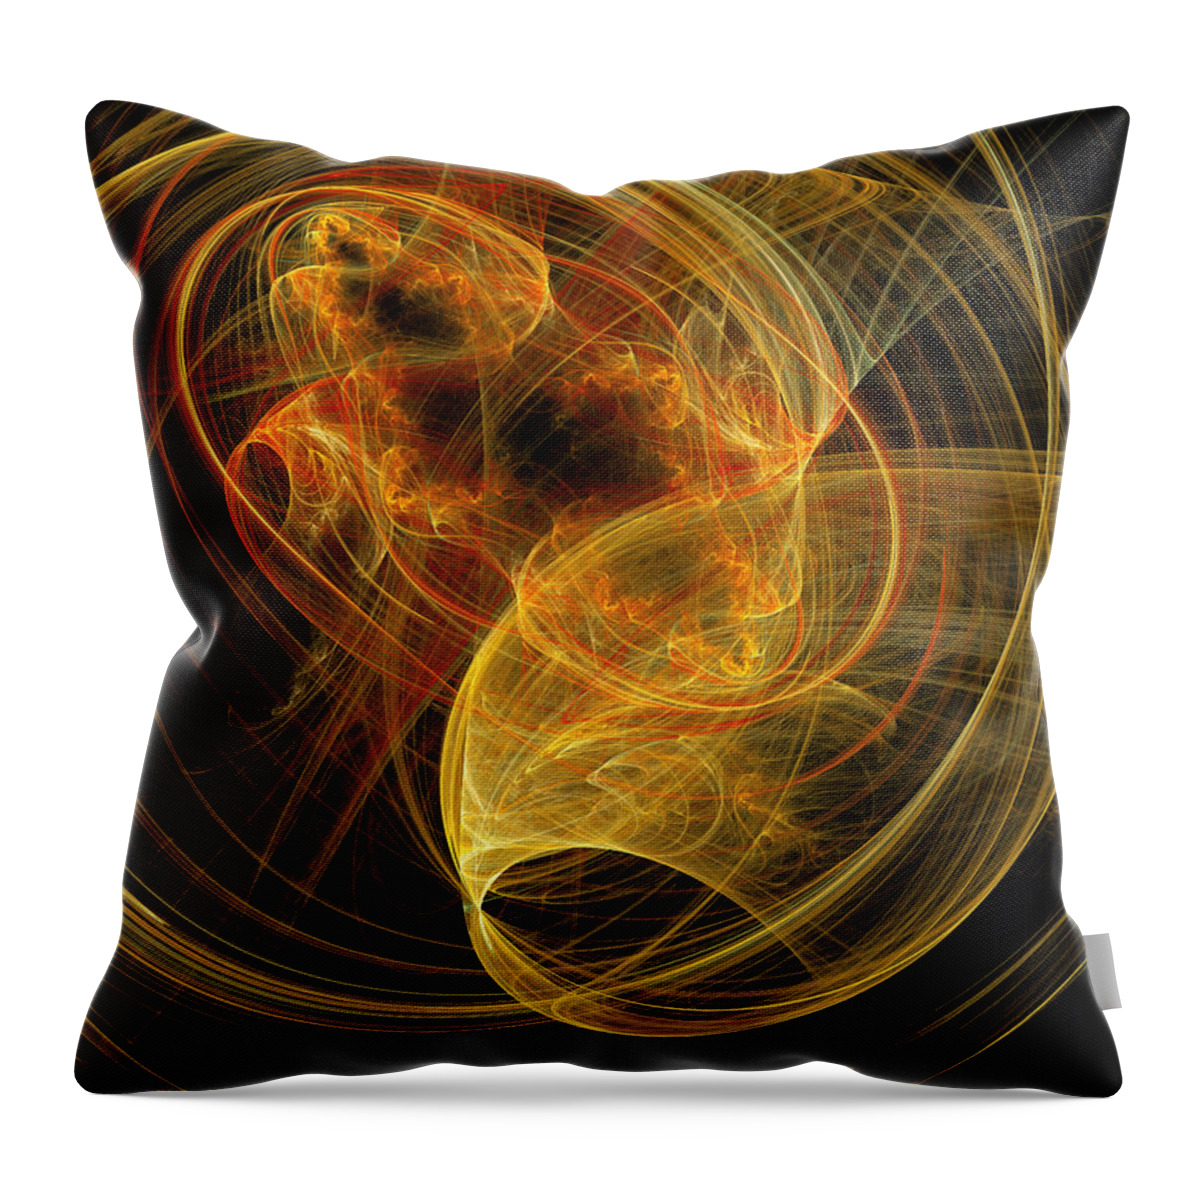 Andee Design Abstract Throw Pillow featuring the digital art Travel In Time To 1969 Time Warp by Andee Design